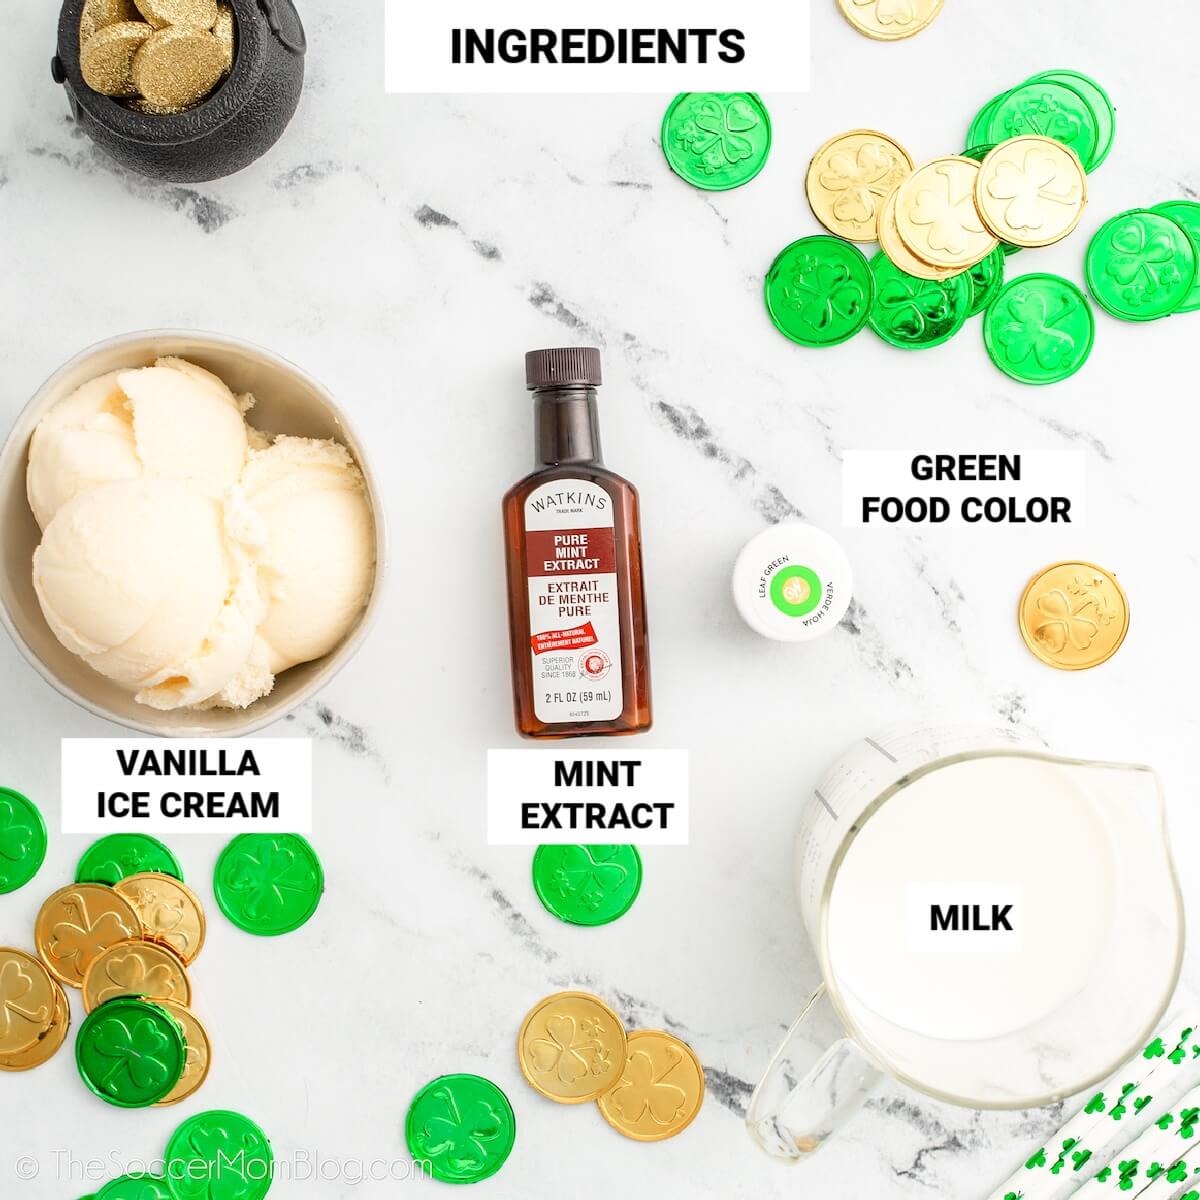 Shamrock shake ingredients, with text labels